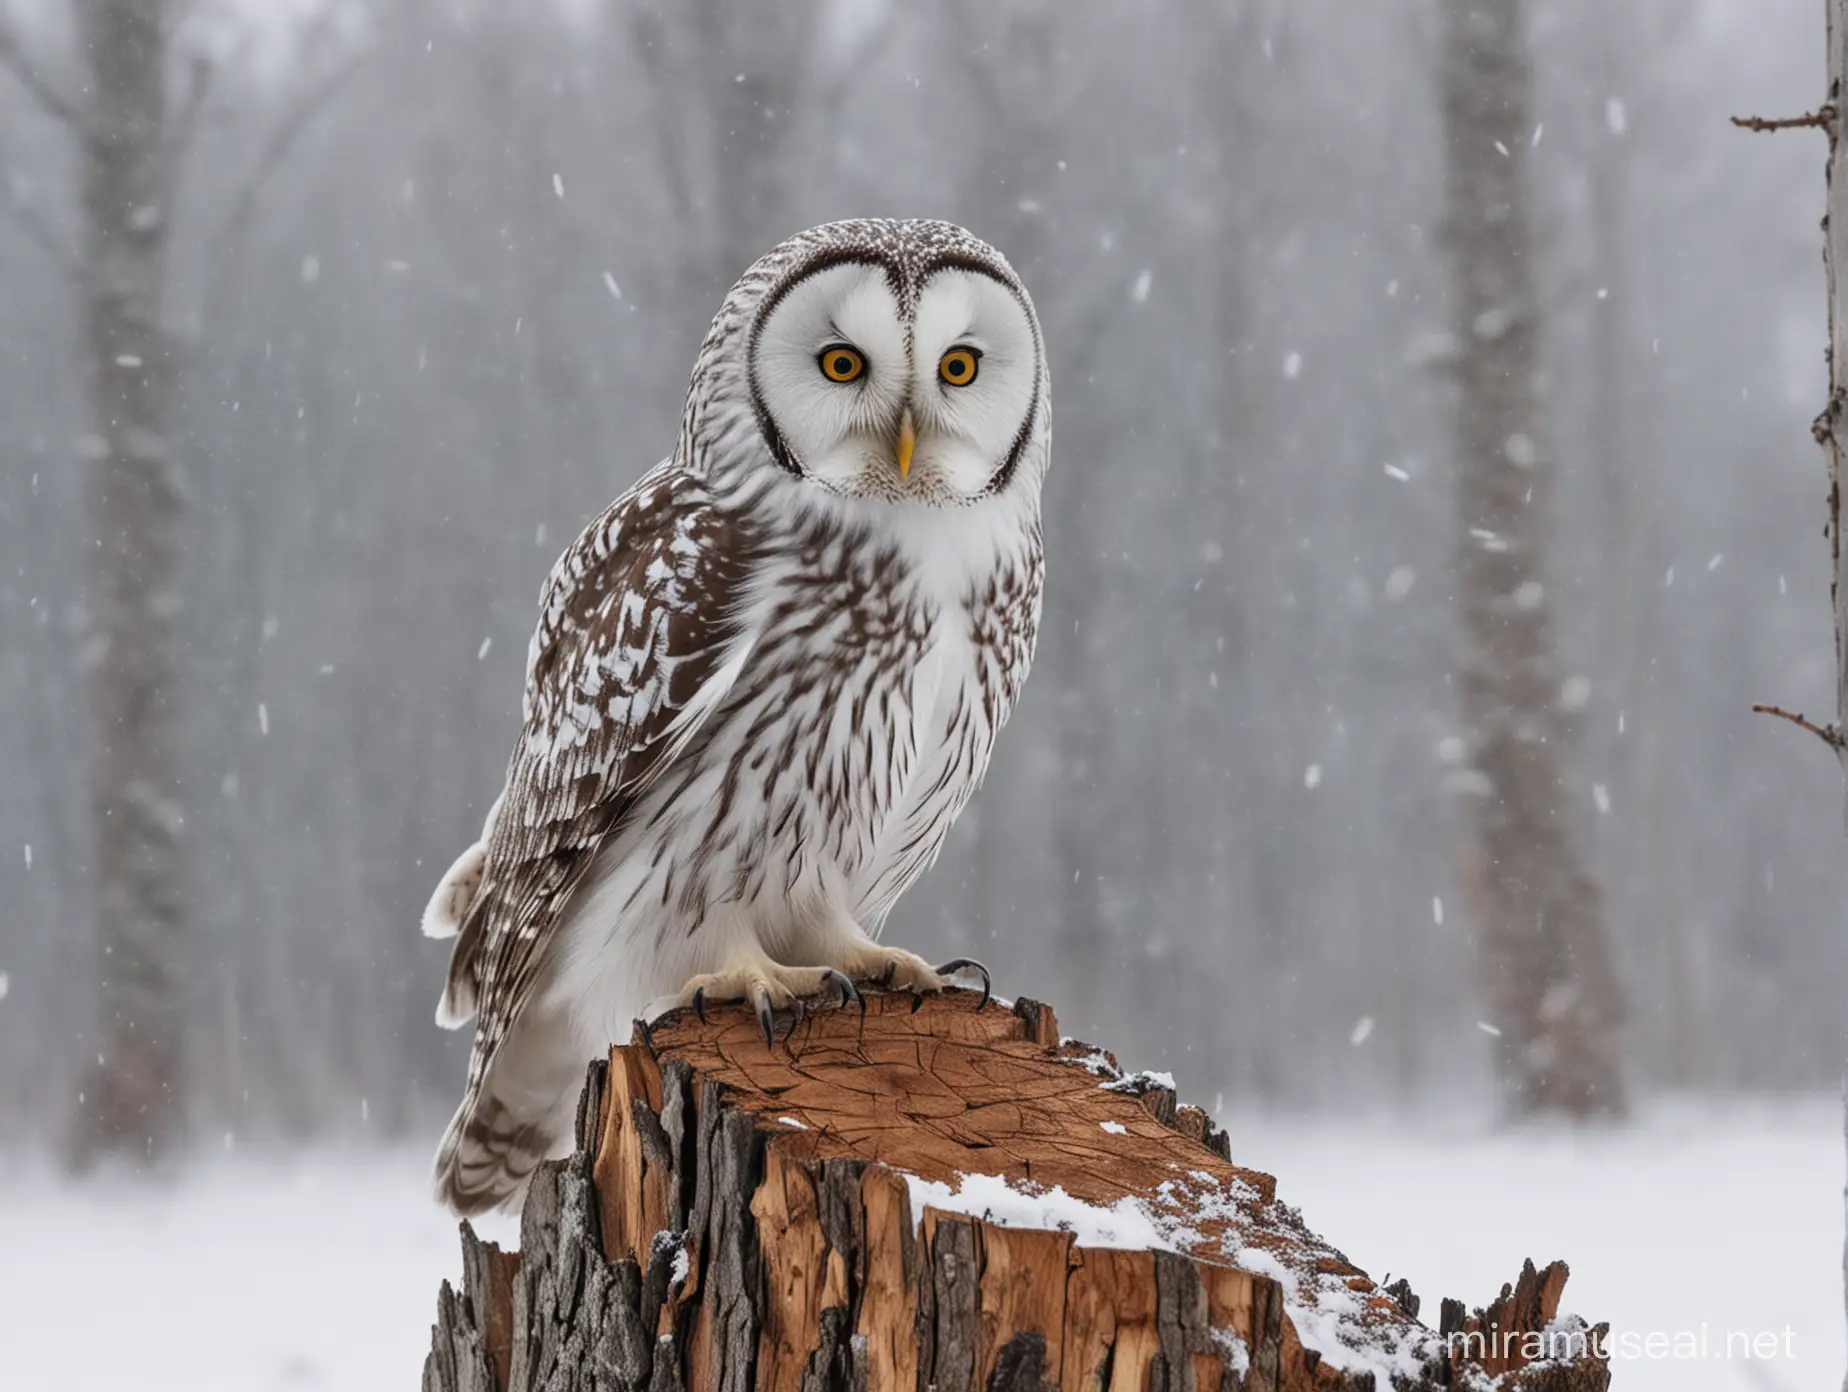 The Lapland owl , scientific name Strix nebulosa, sits on a long stump, with a mouse caught in his mouth, the day is cloudy and snow is slowly falling.